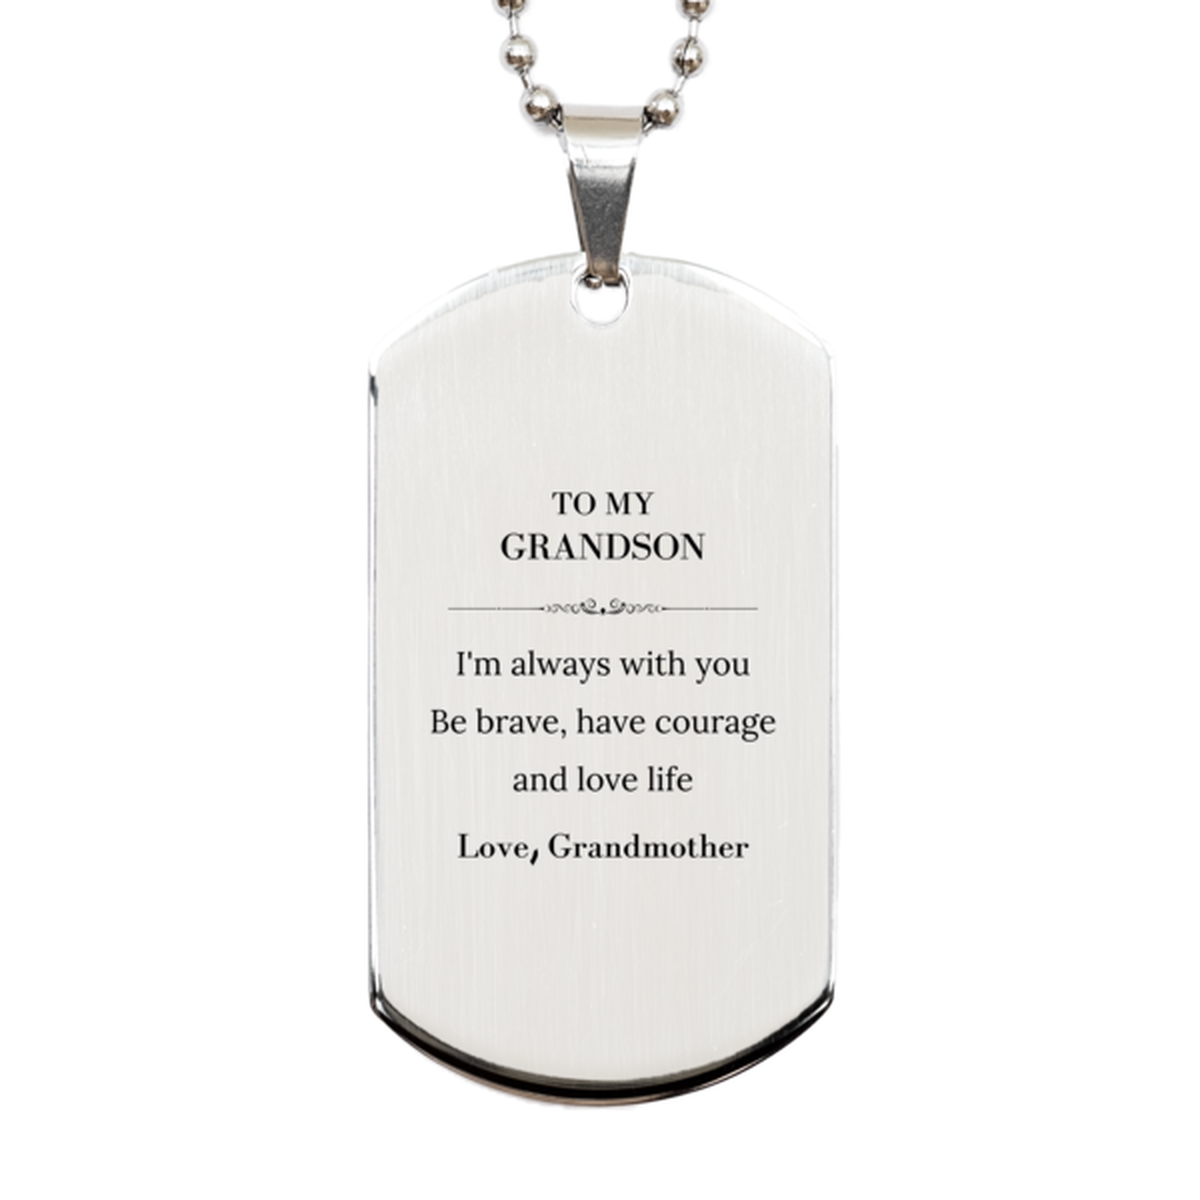 To My Grandson Gifts from Grandmother, Unique Silver Dog Tag Inspirational Christmas Birthday Graduation Gifts for Grandson I'm always with you. Be brave, have courage and love life. Love, Grandmother